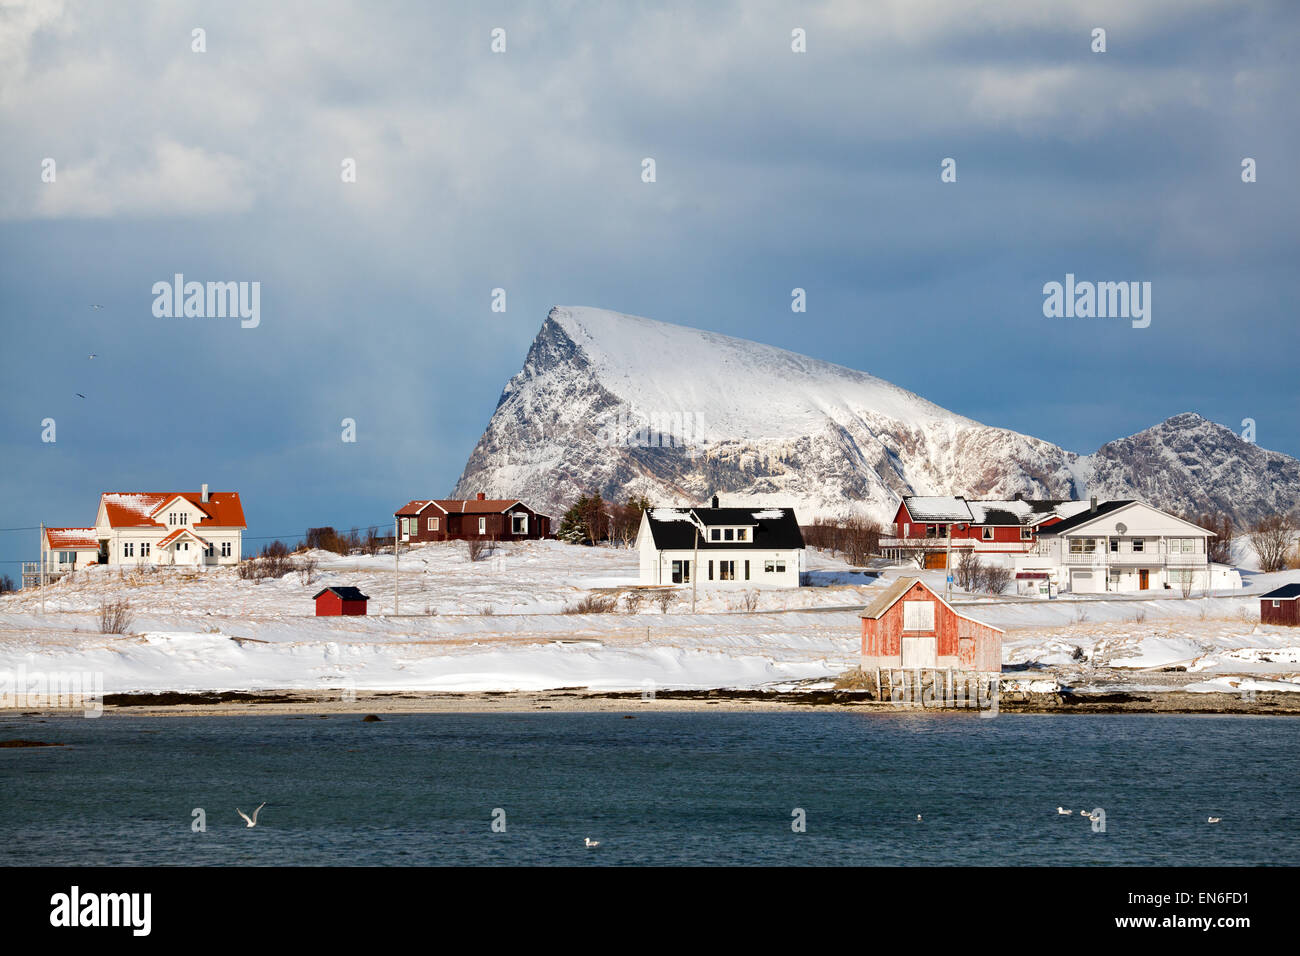 Remote village on a snowy island in northern Norway Stock Photo